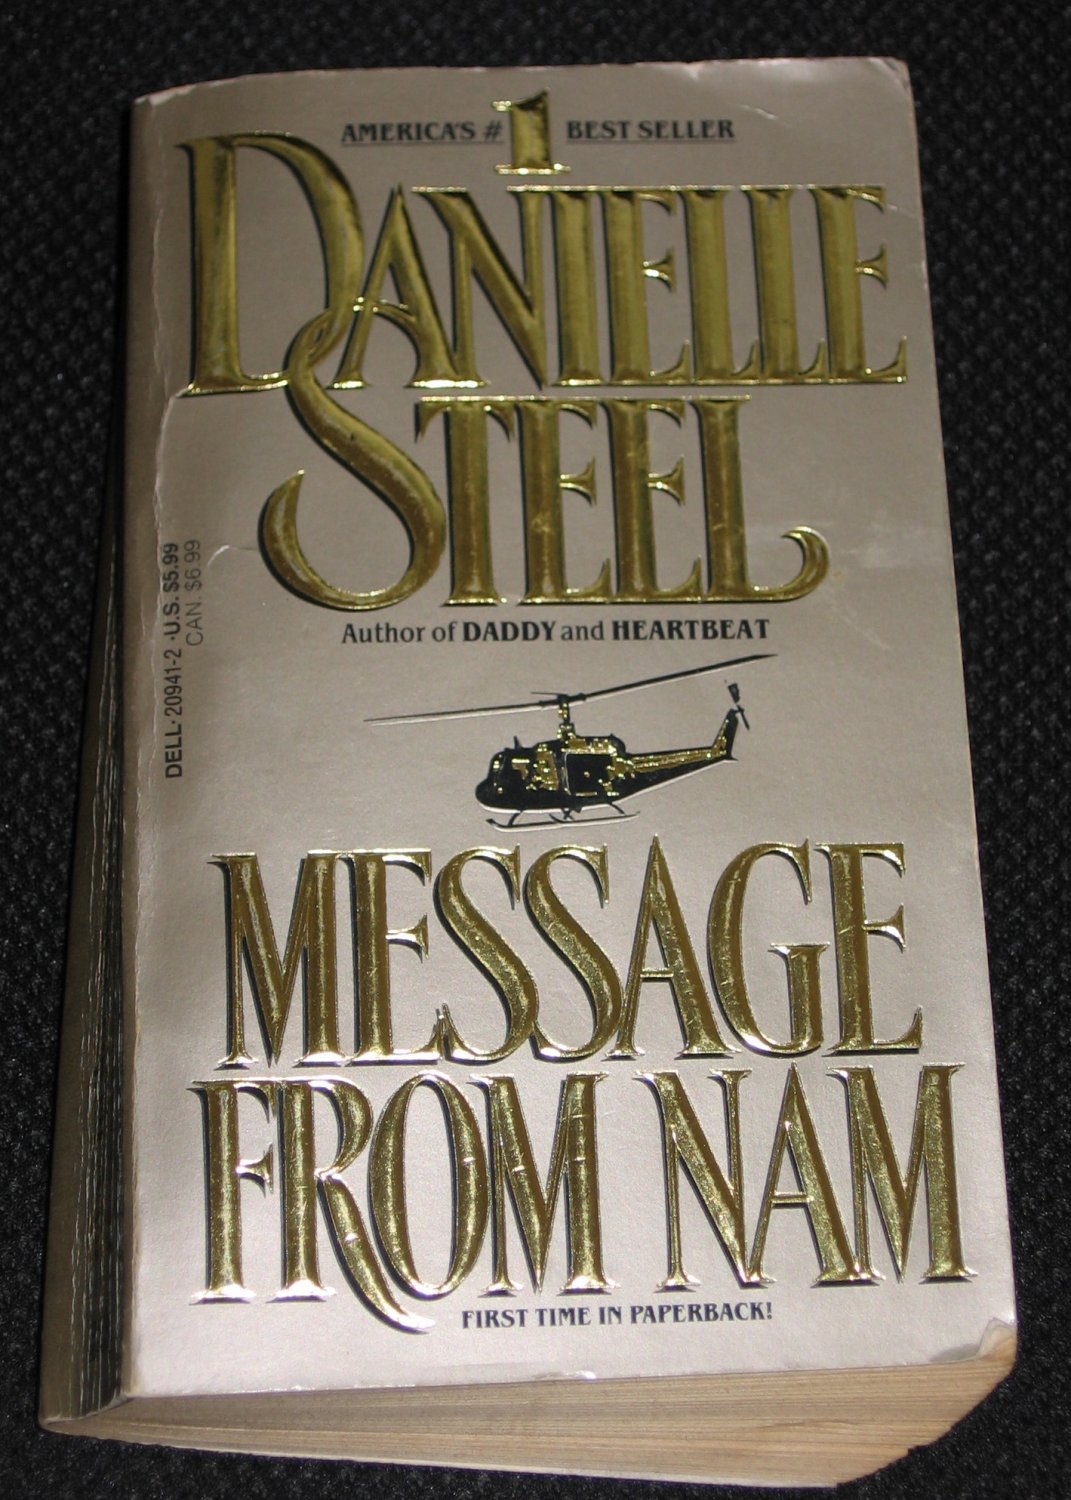 danielle steel message from nam movie